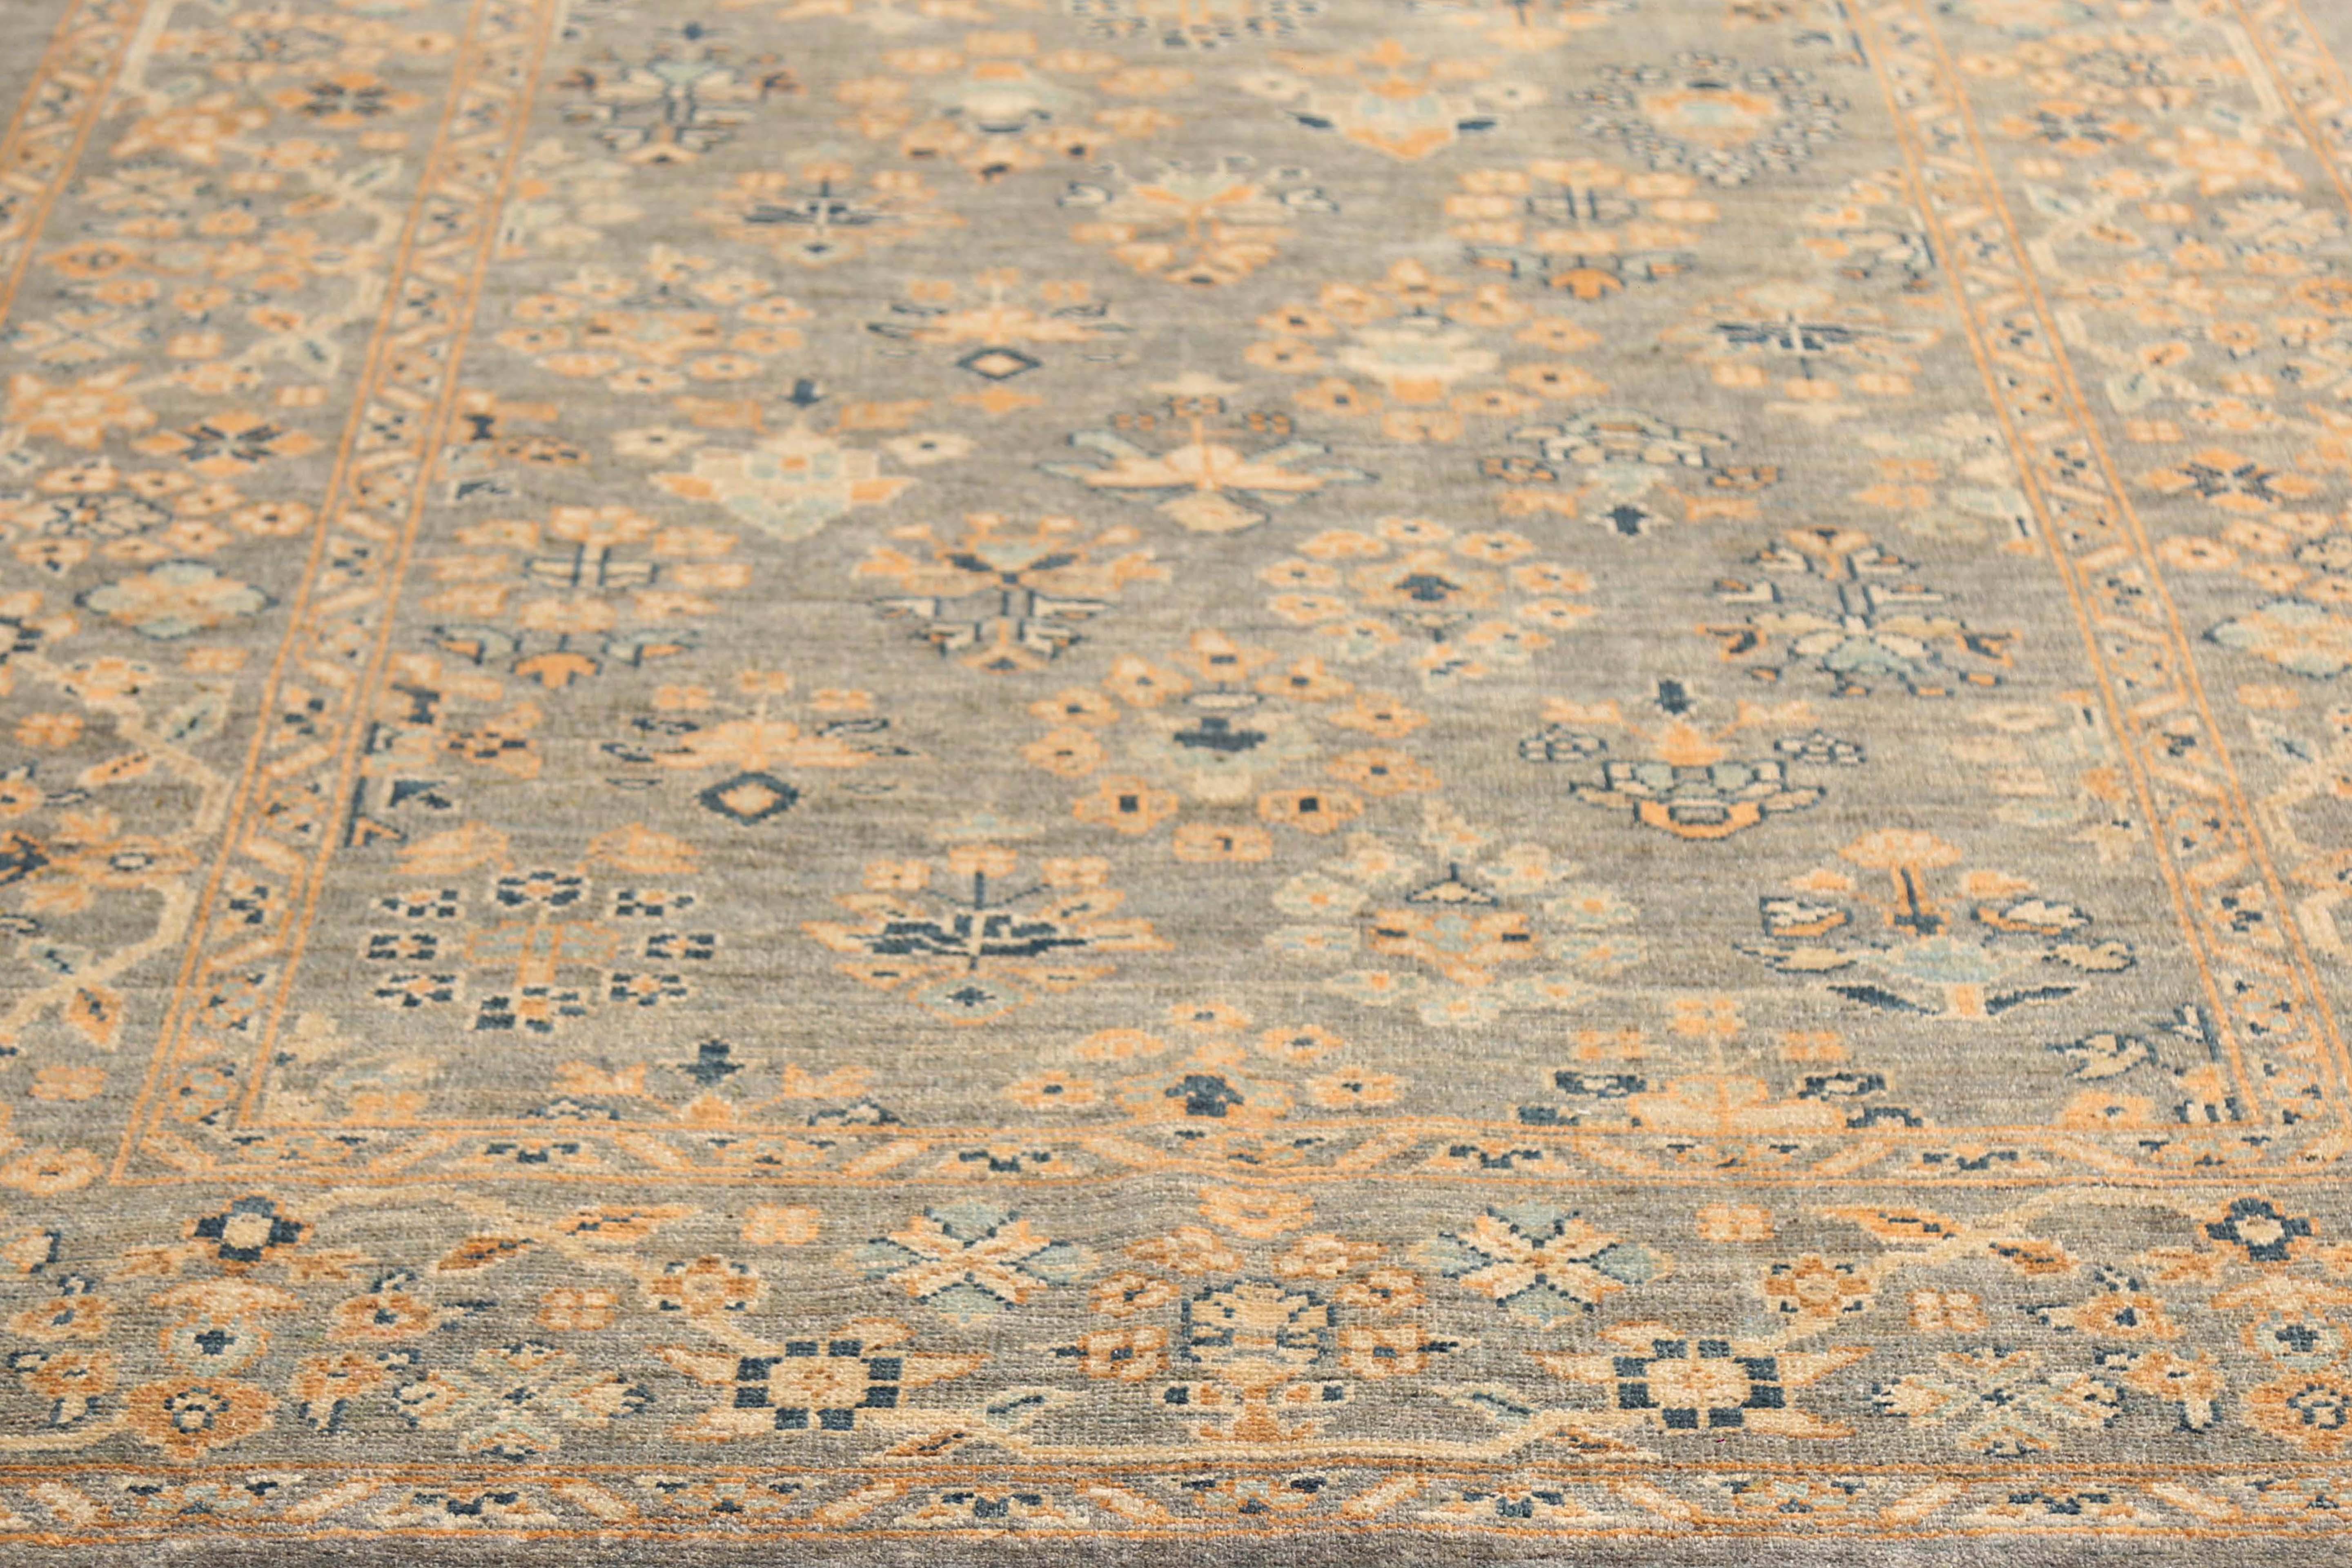 Introducing our stunning handmade Turkish Sultanabad rug, measuring 6'1'' by 9'8''. This exquisite rug features a dark brown and grey background, with a beautiful blend of light orange, blue, and navy colors incorporated into the traditional design.